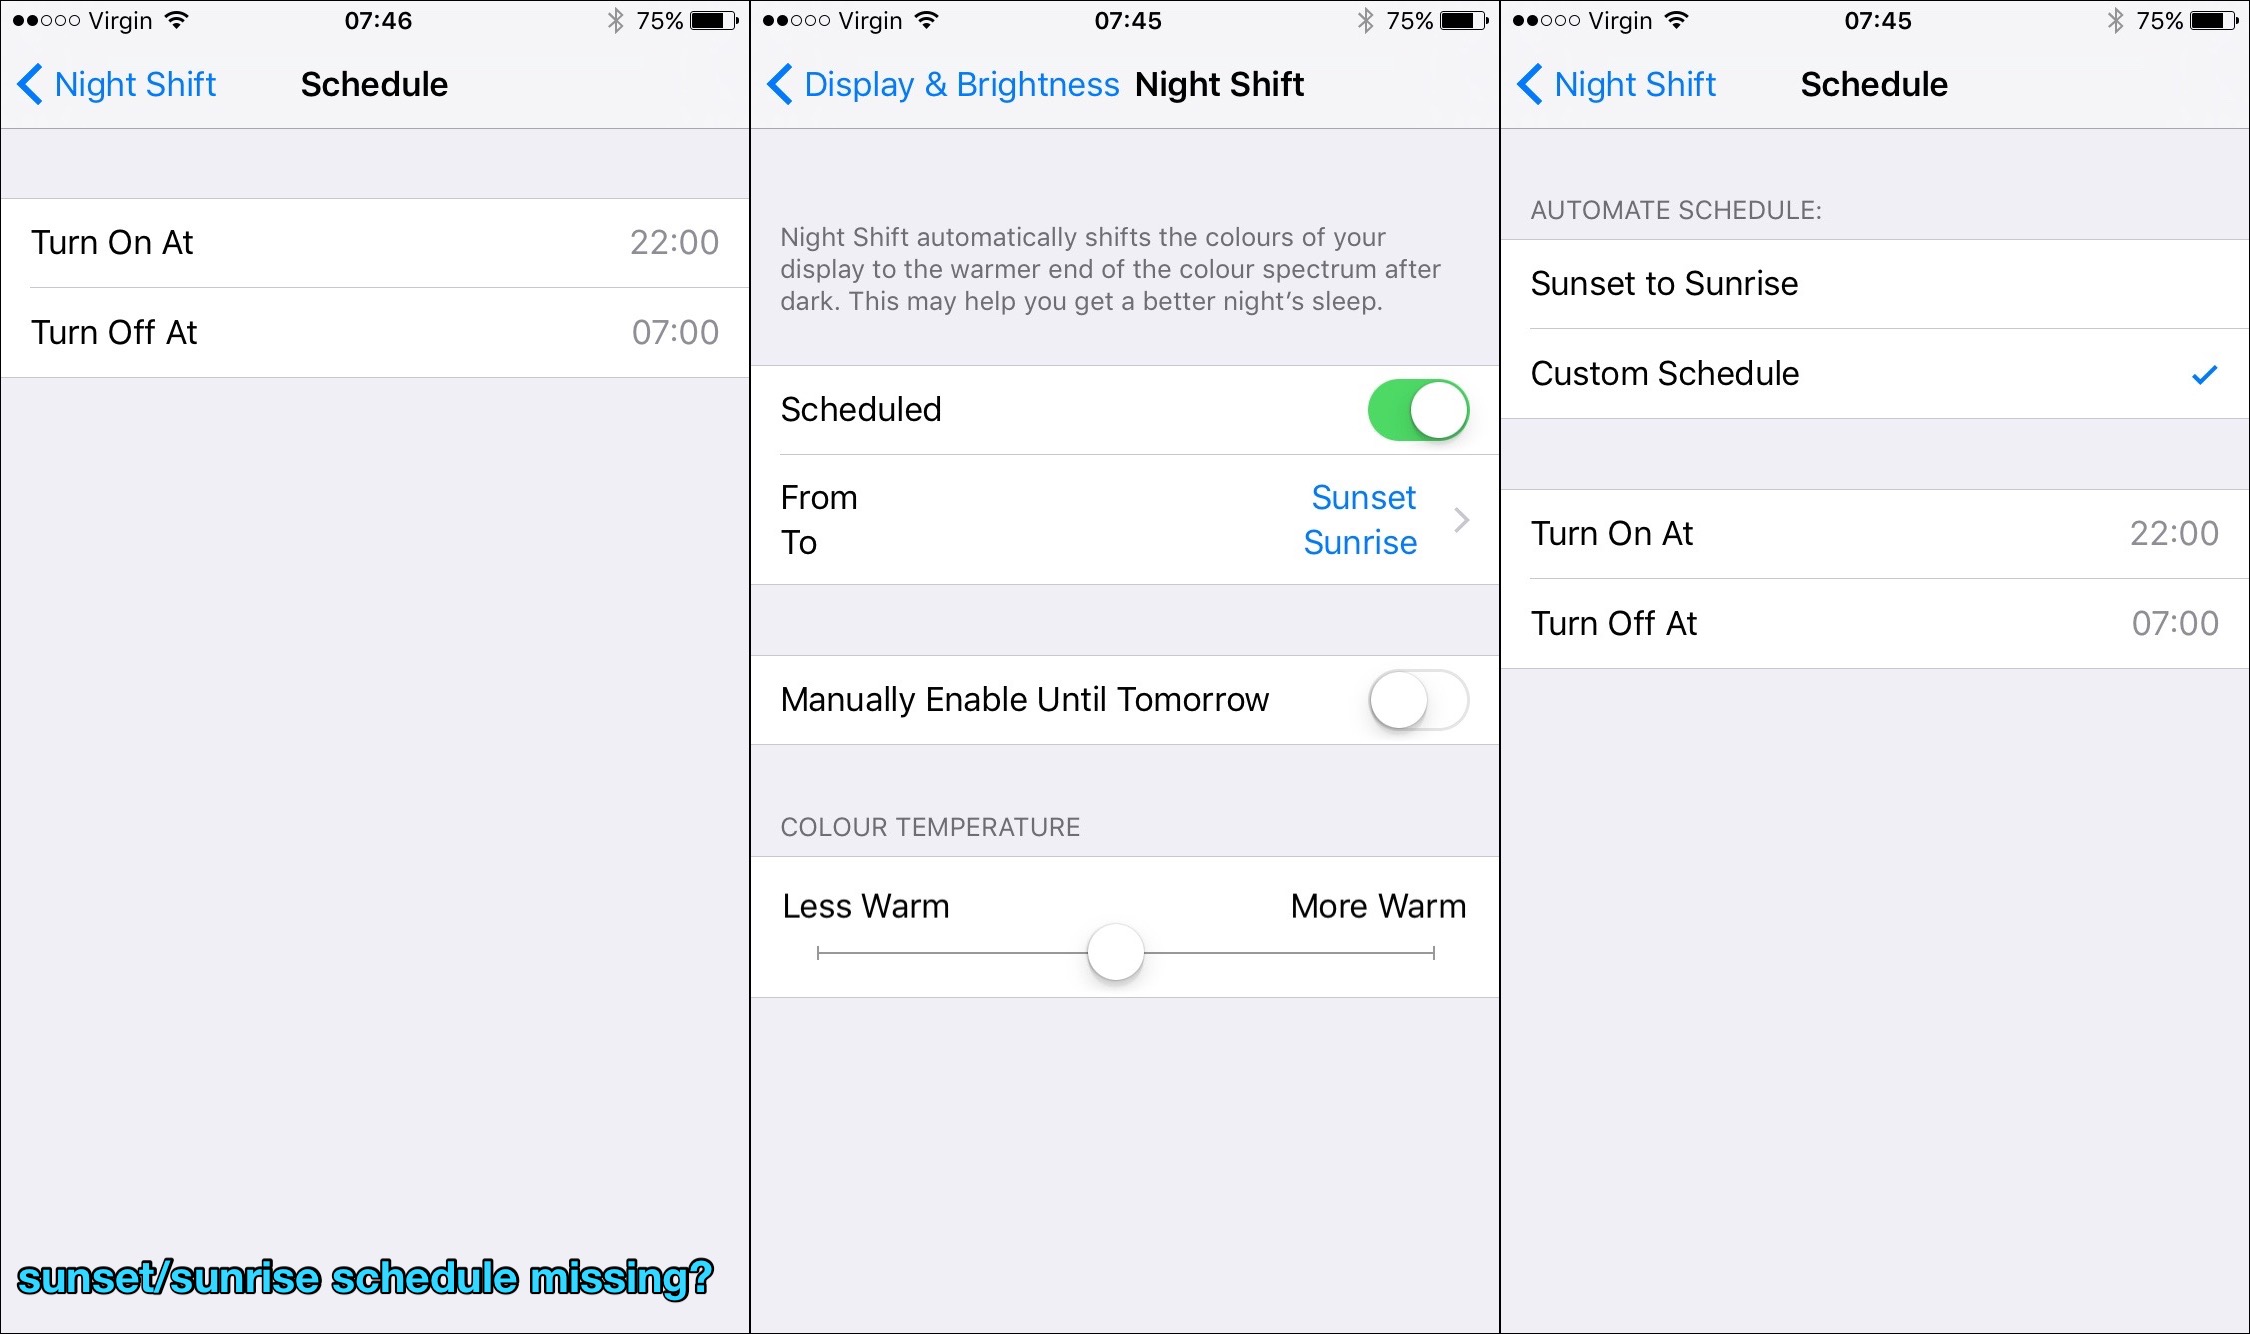 How to Force Night Shift from Turning On Automatically in iOS 11 [Tutorial]